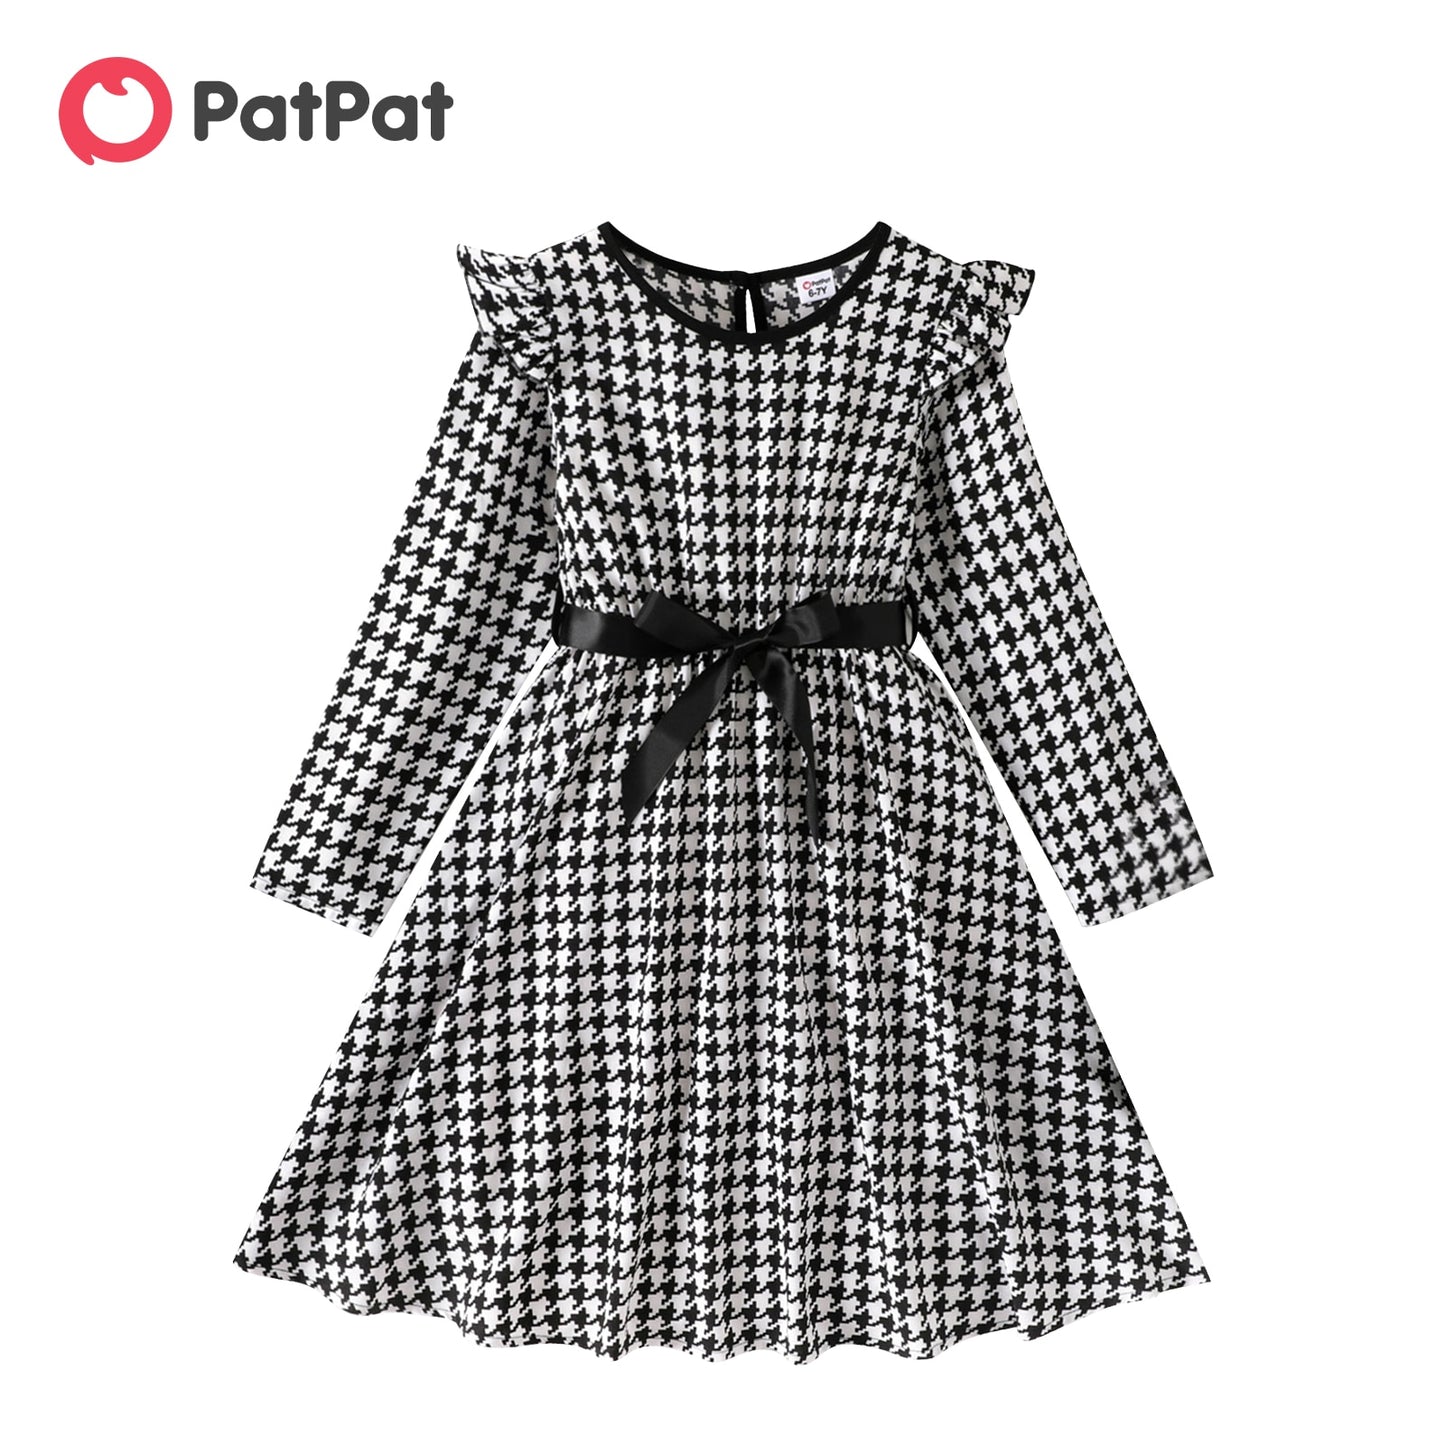 Houndstooth Ruffle Belted Dress